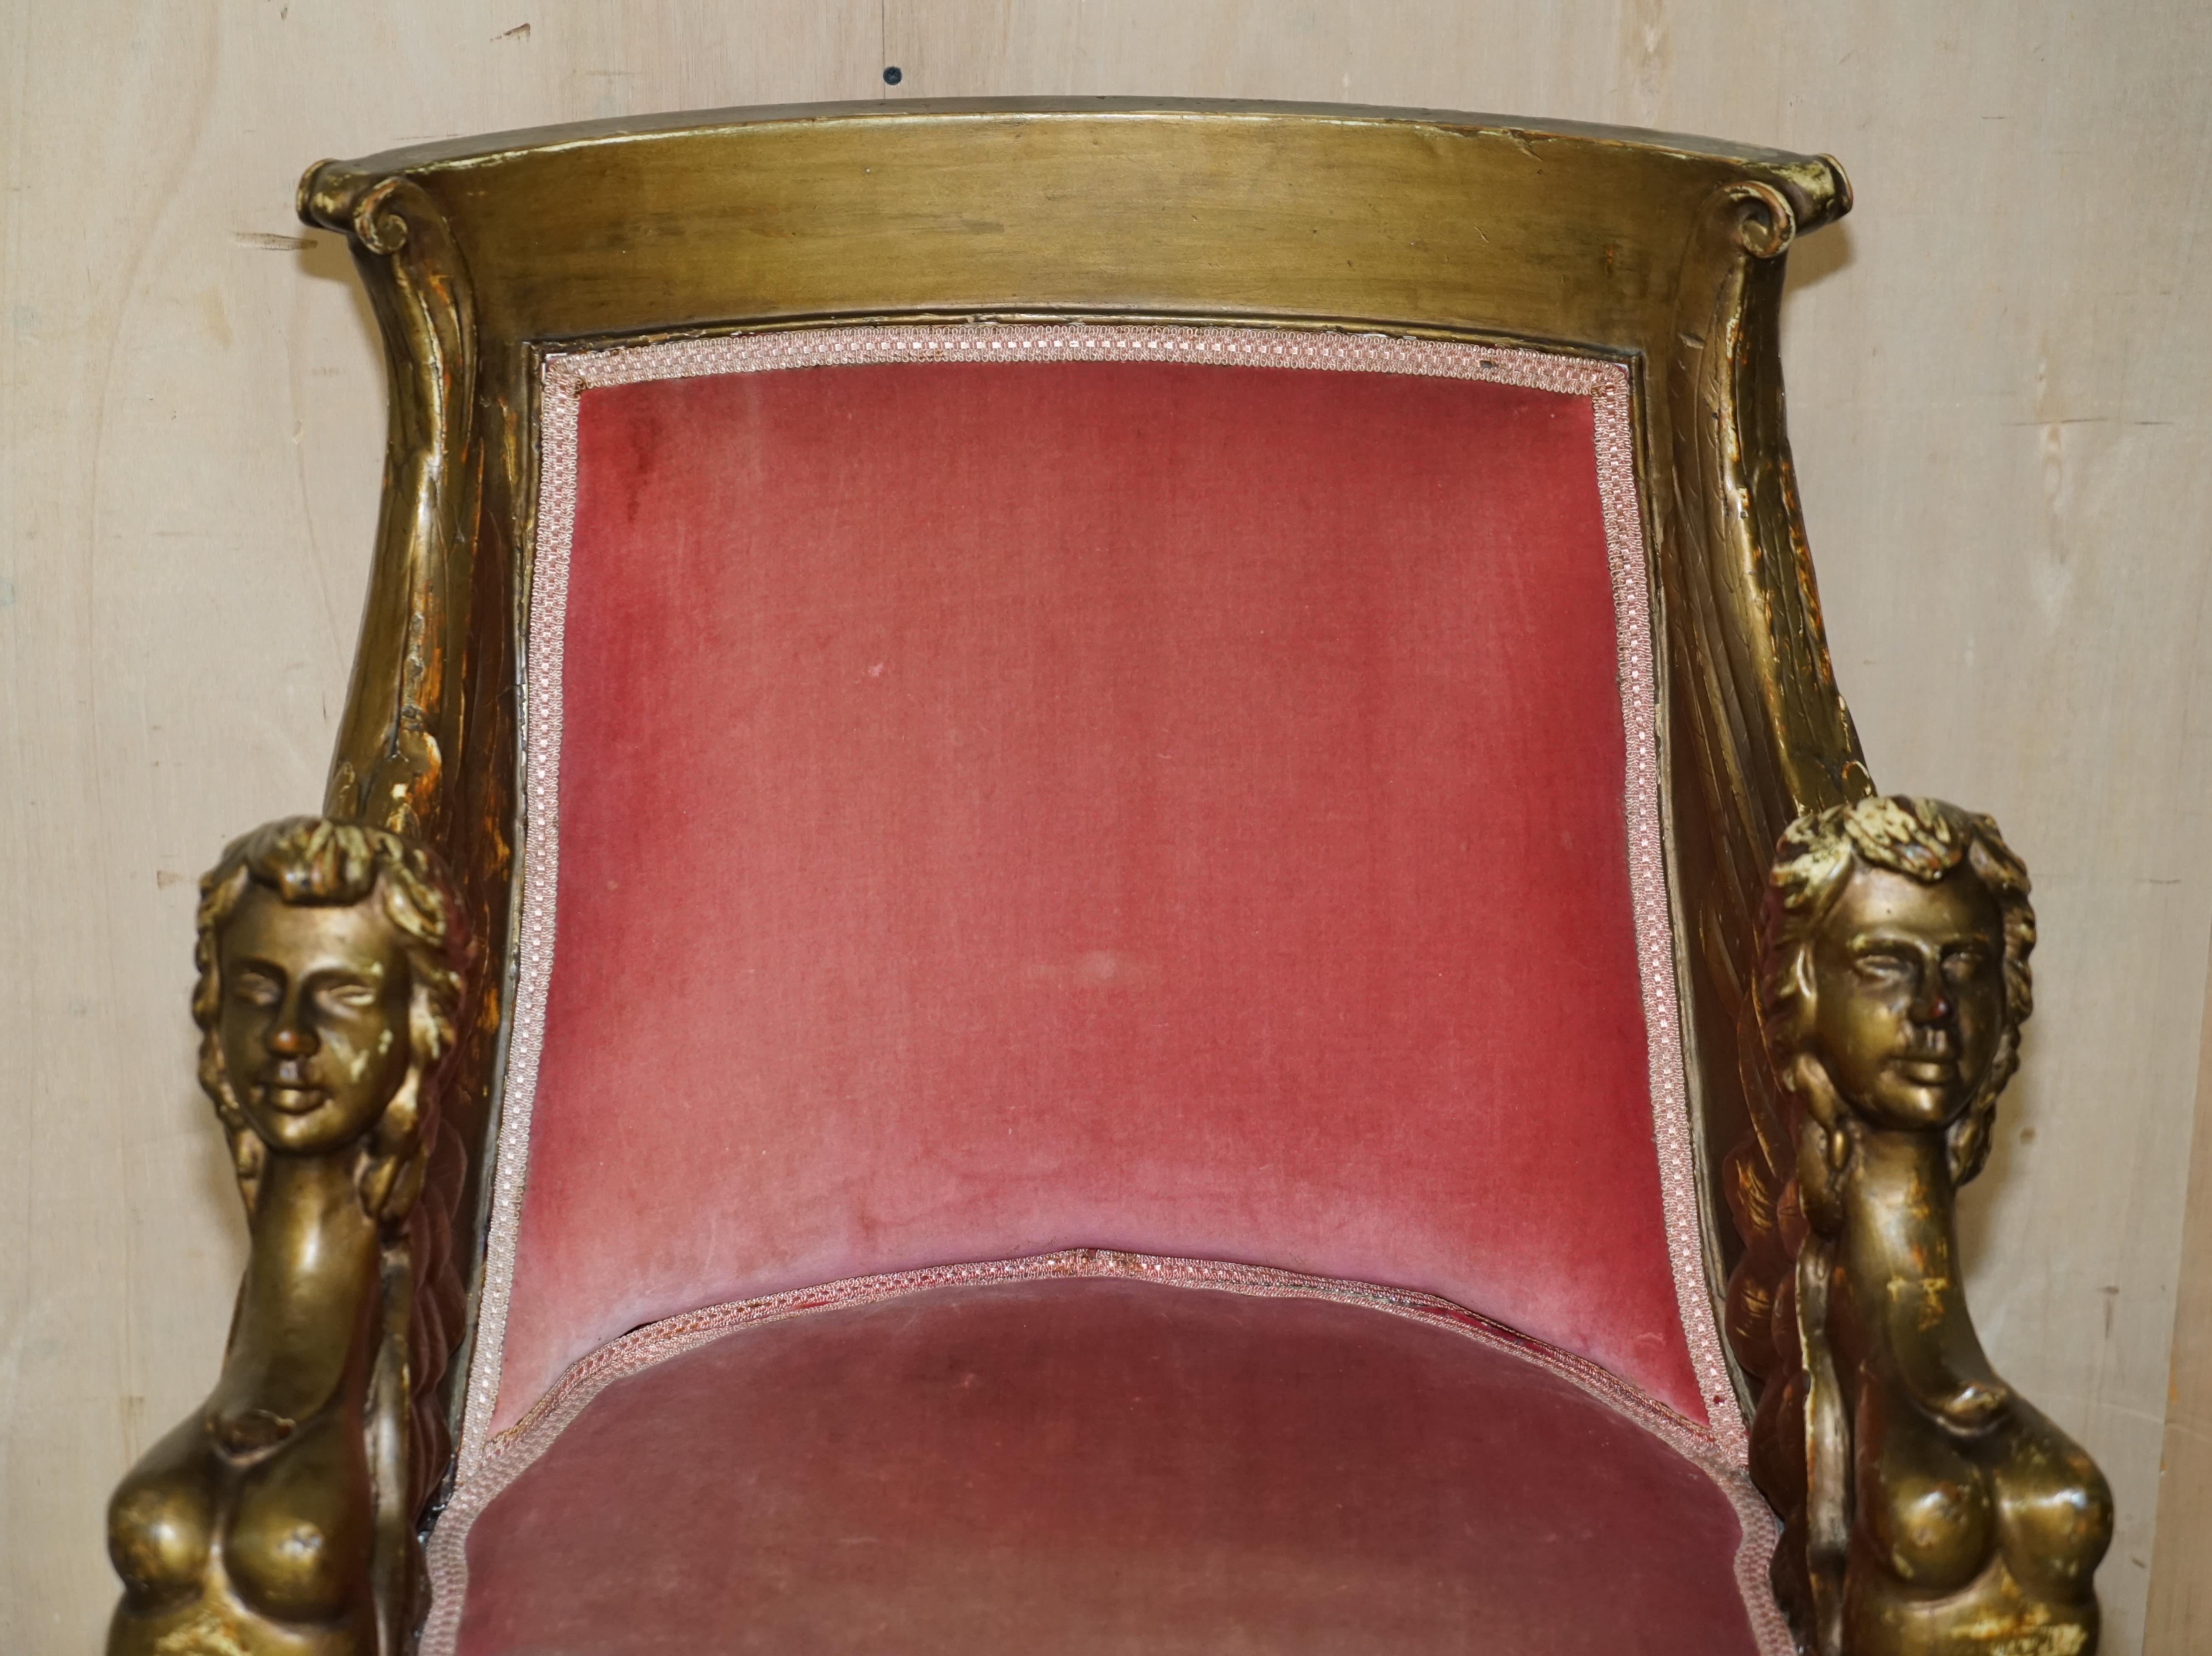 Hand-Crafted After Thomas Hope Antique circa 1780 George III Hand Carved Giltwood Armchair For Sale